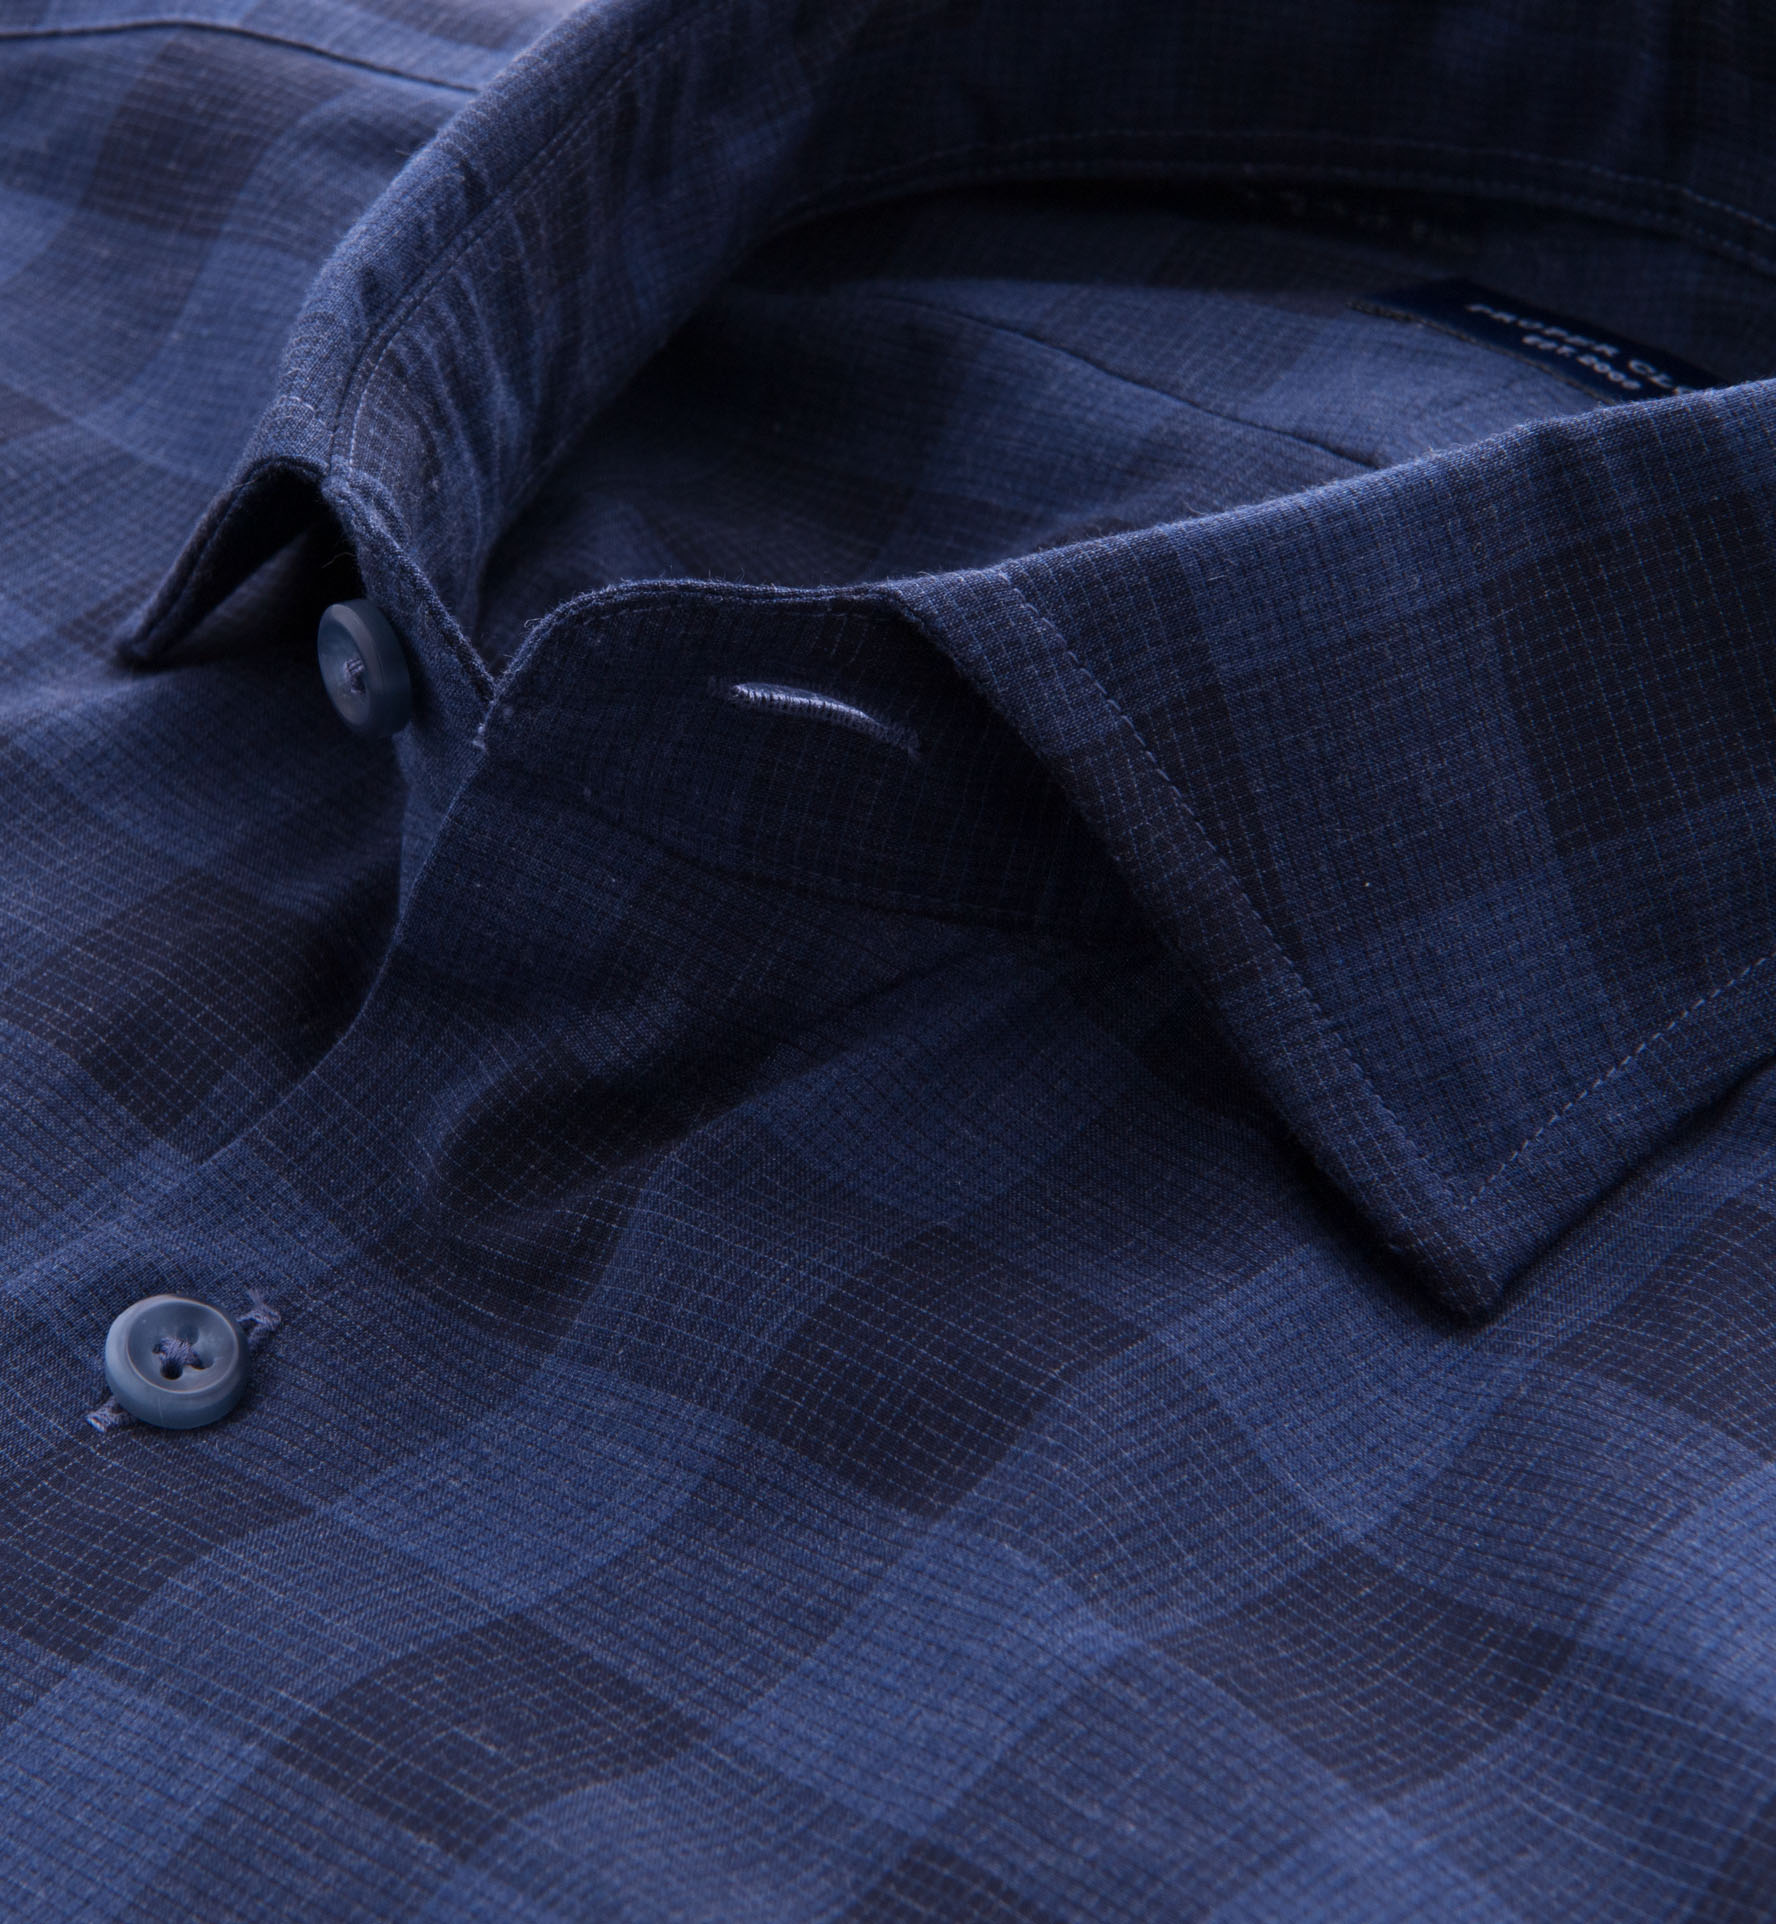 Monterey Navy Shadow Plaid Tailor Made Shirt by Proper Cloth